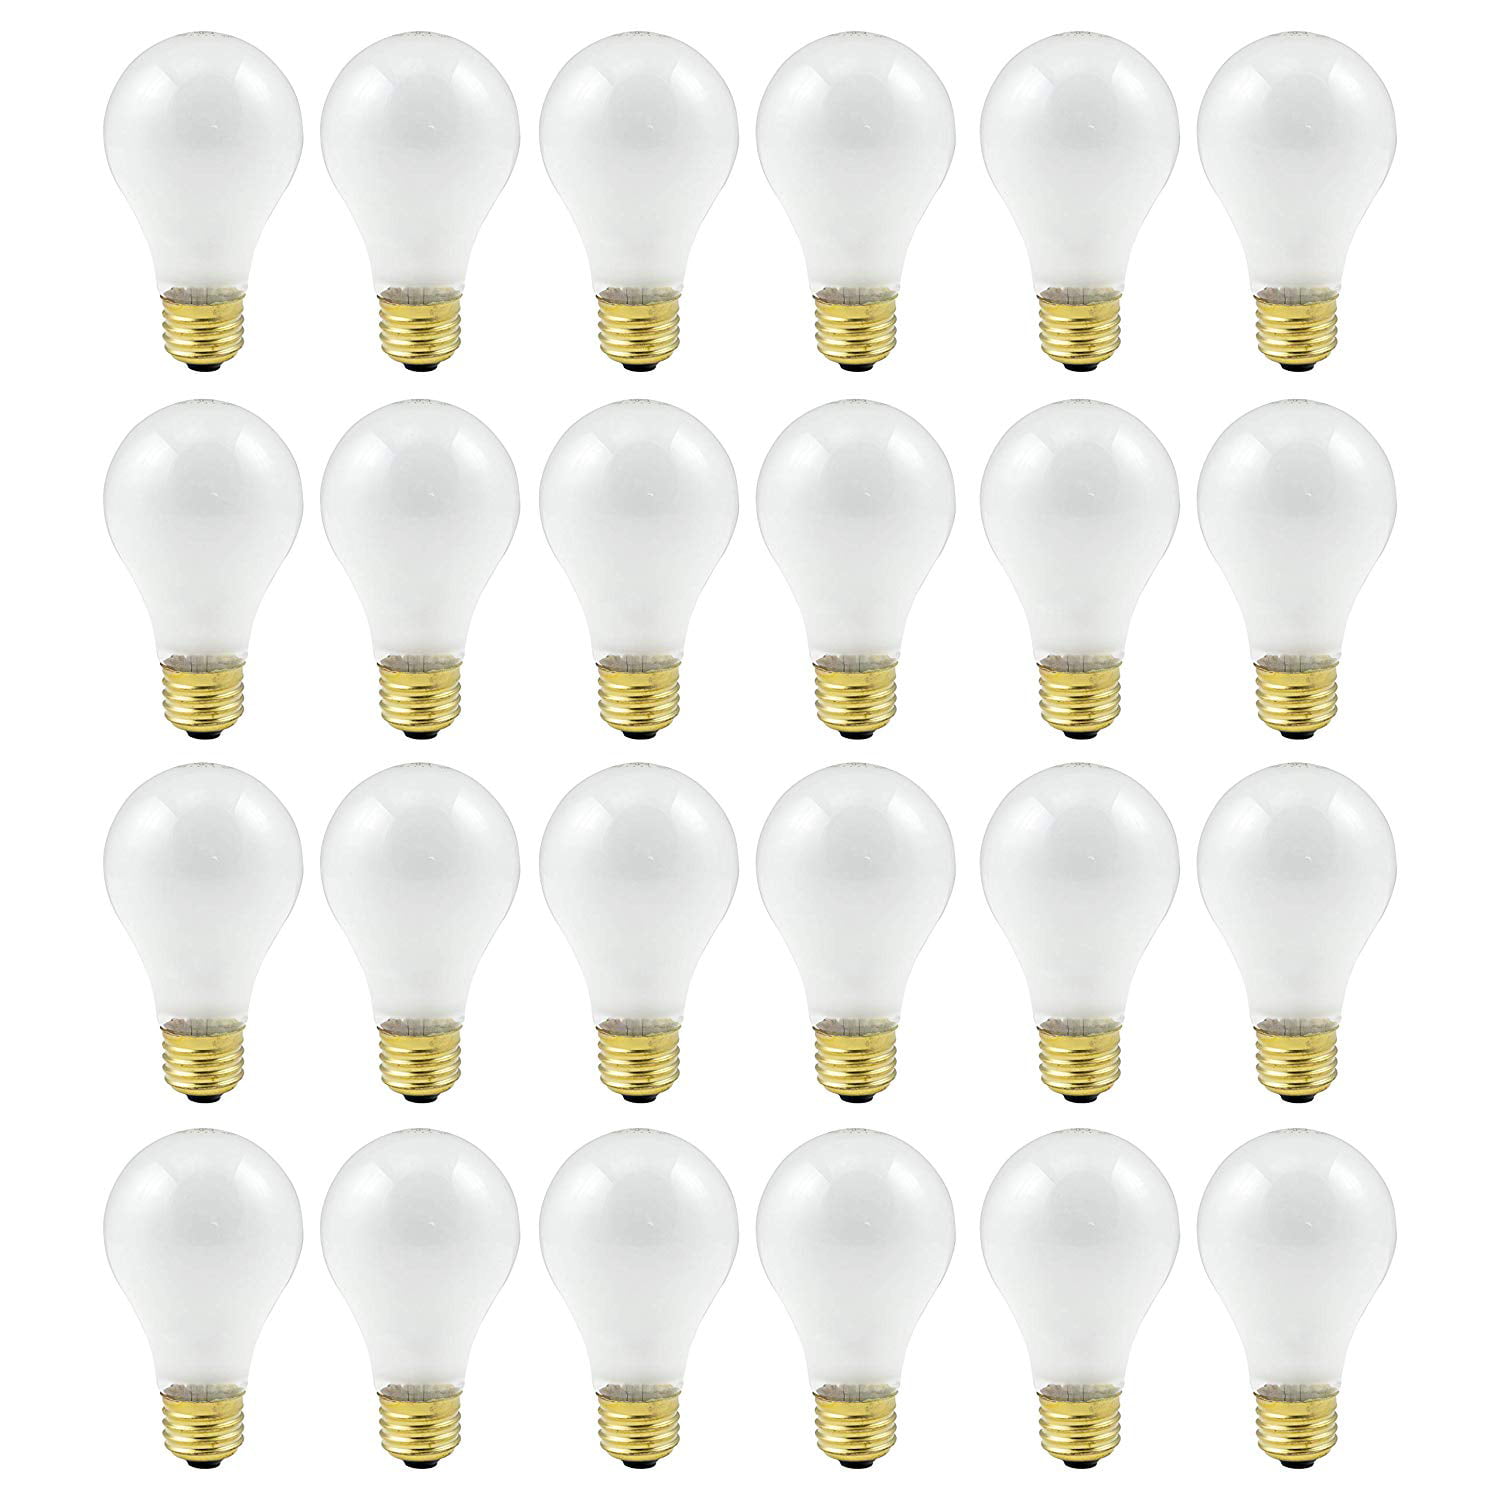 24 Pack by GoodBulb Frosted Medium Base 130 Volt Rough Service 6O Watt A19 Light Bulb Long Term Care Lighting 5000 Hour Incandescent